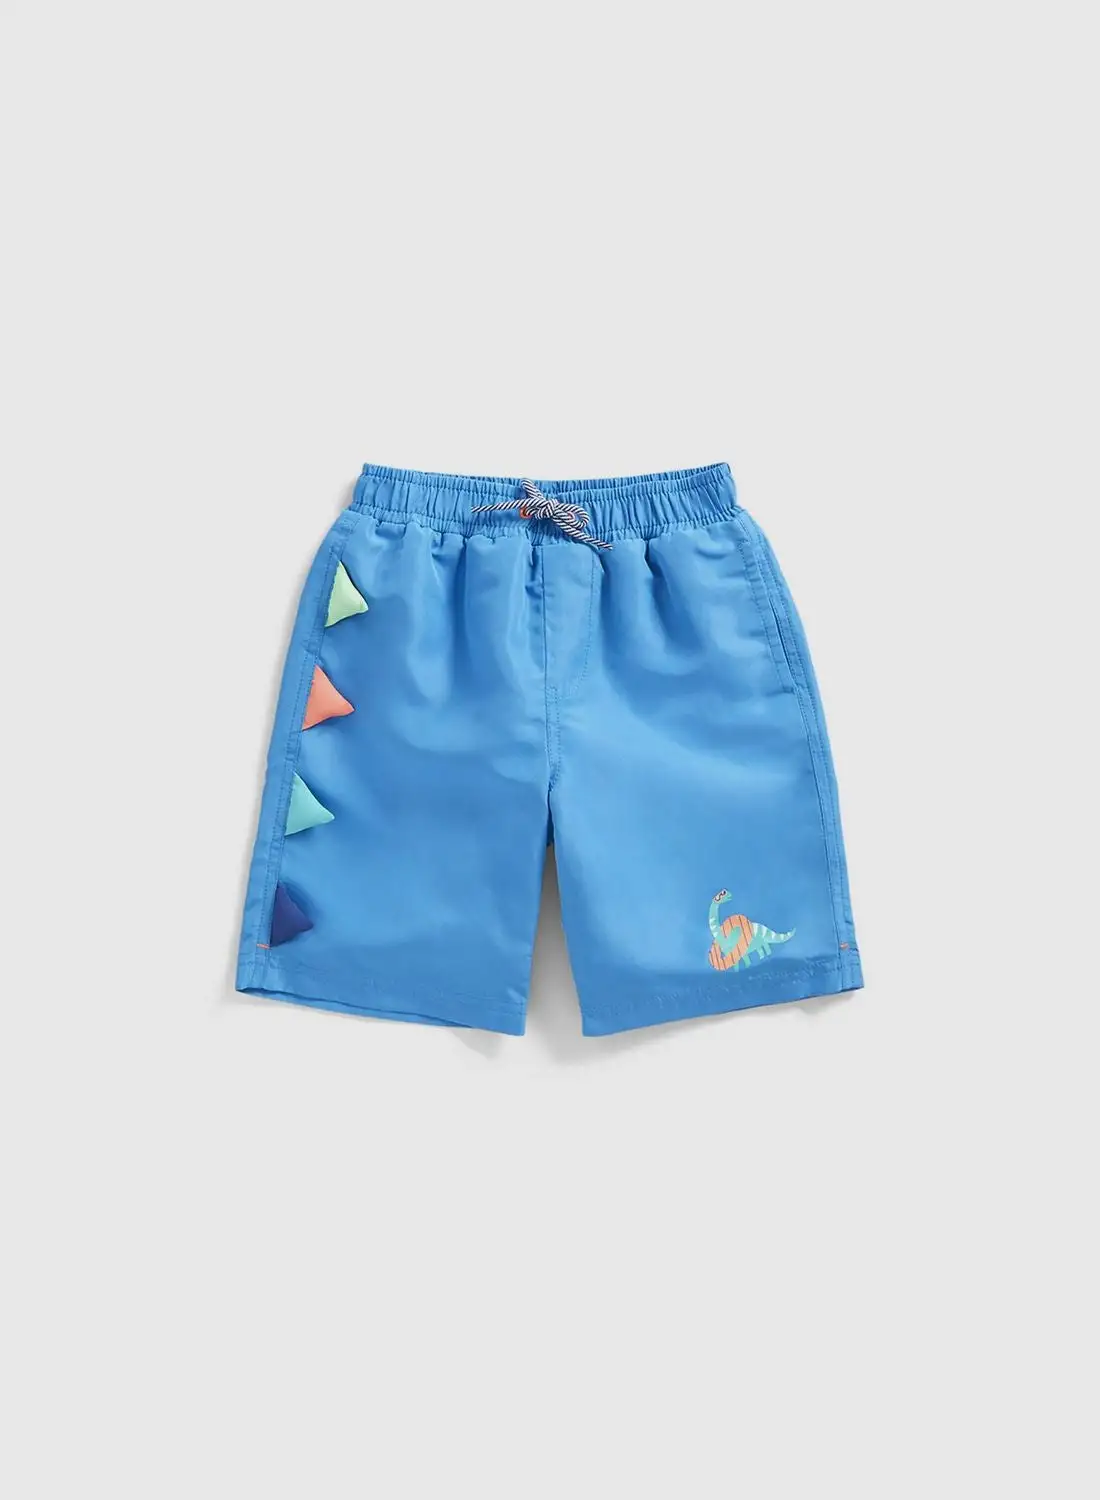 mothercare Kids Dino Spikes Shorts